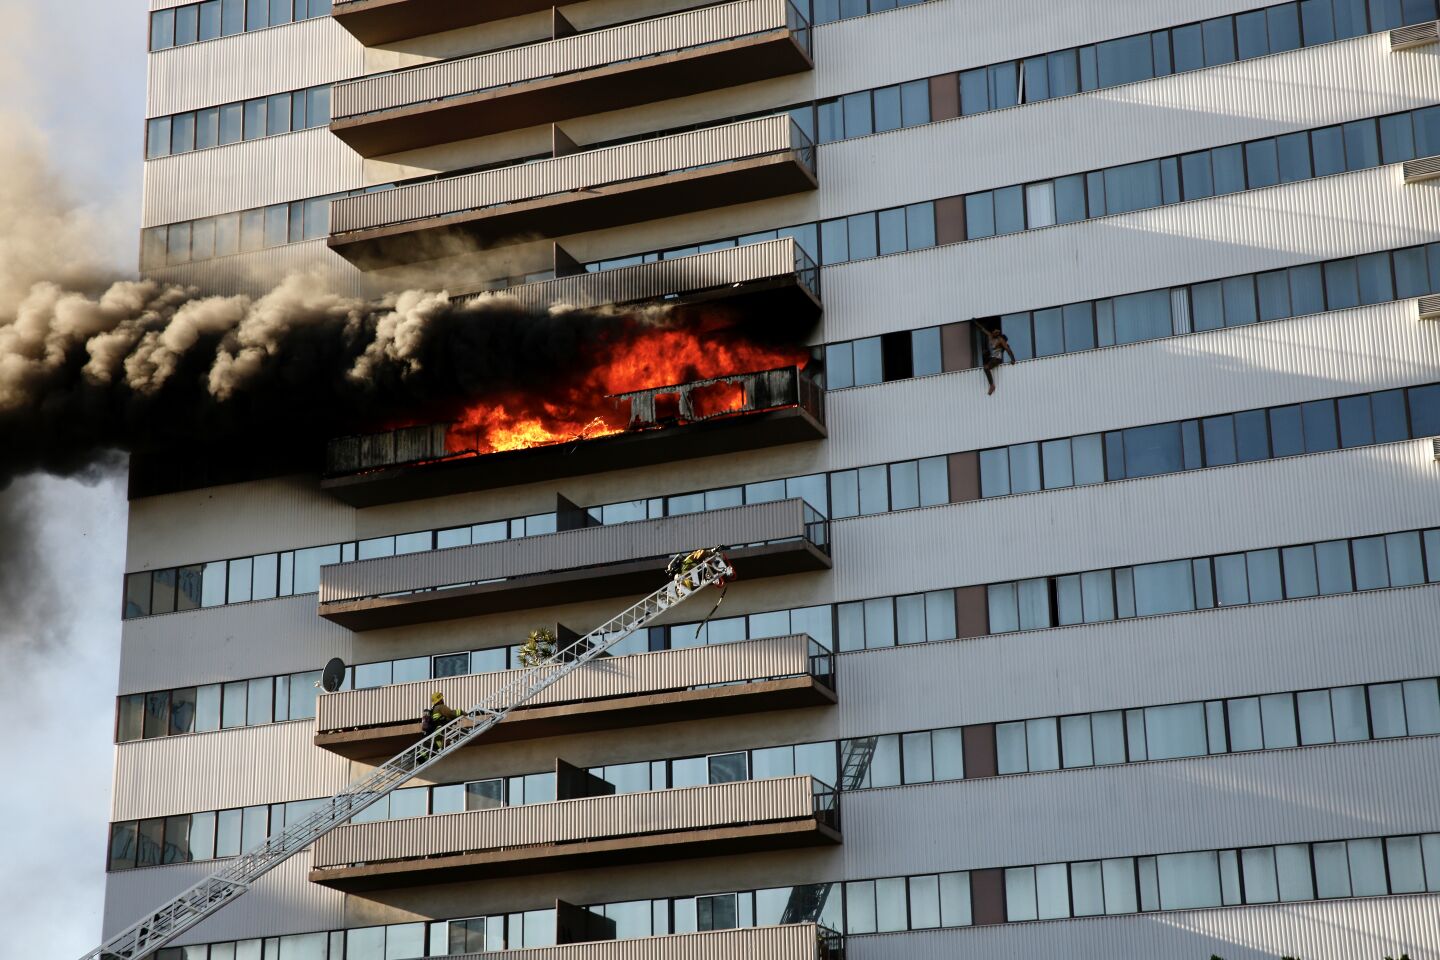 Fire breaks out in L.A. high-rise